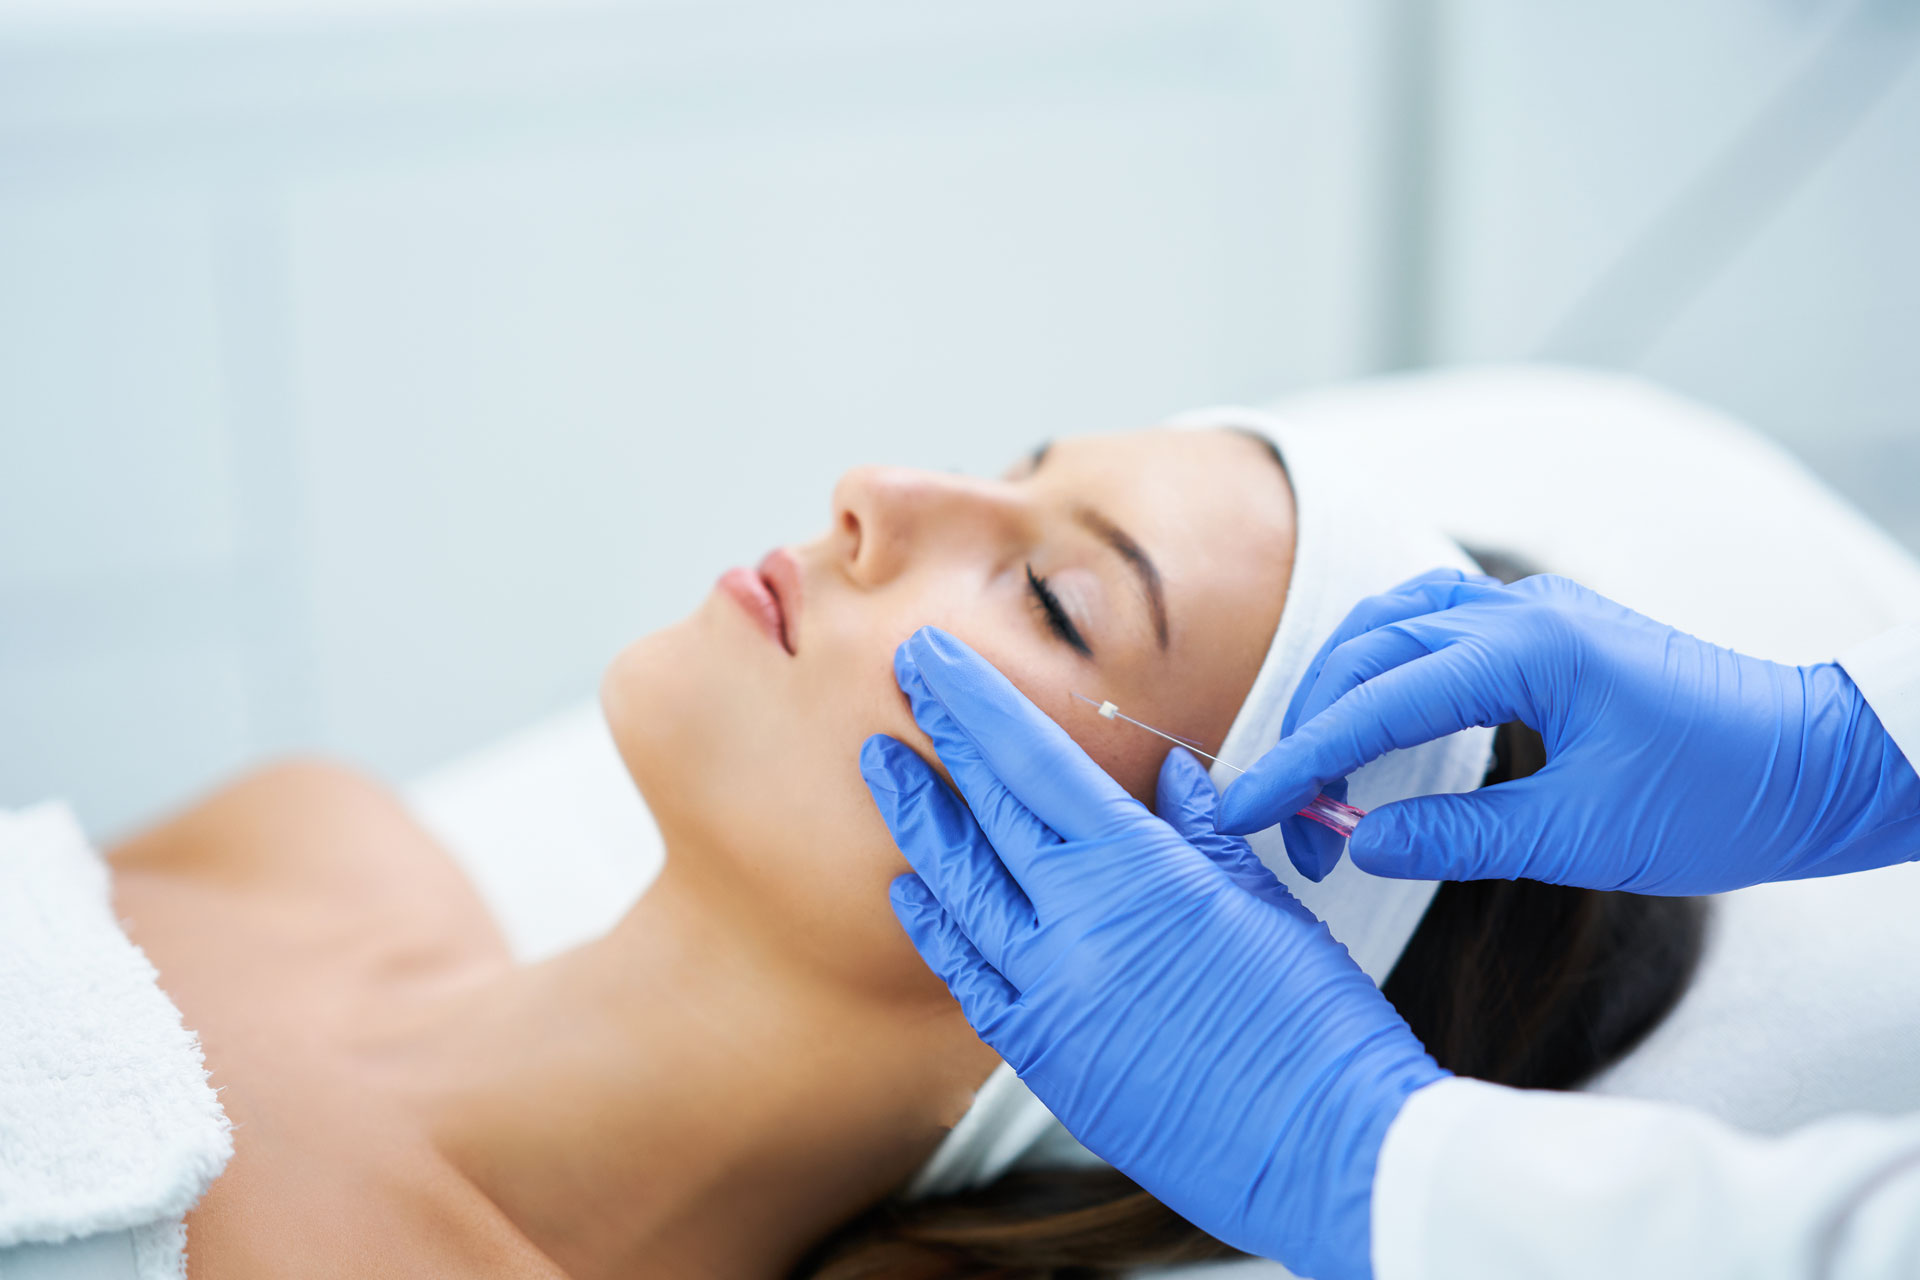 How to Choose the Right Service Provider for Getting Anti-Wrinkle Injections